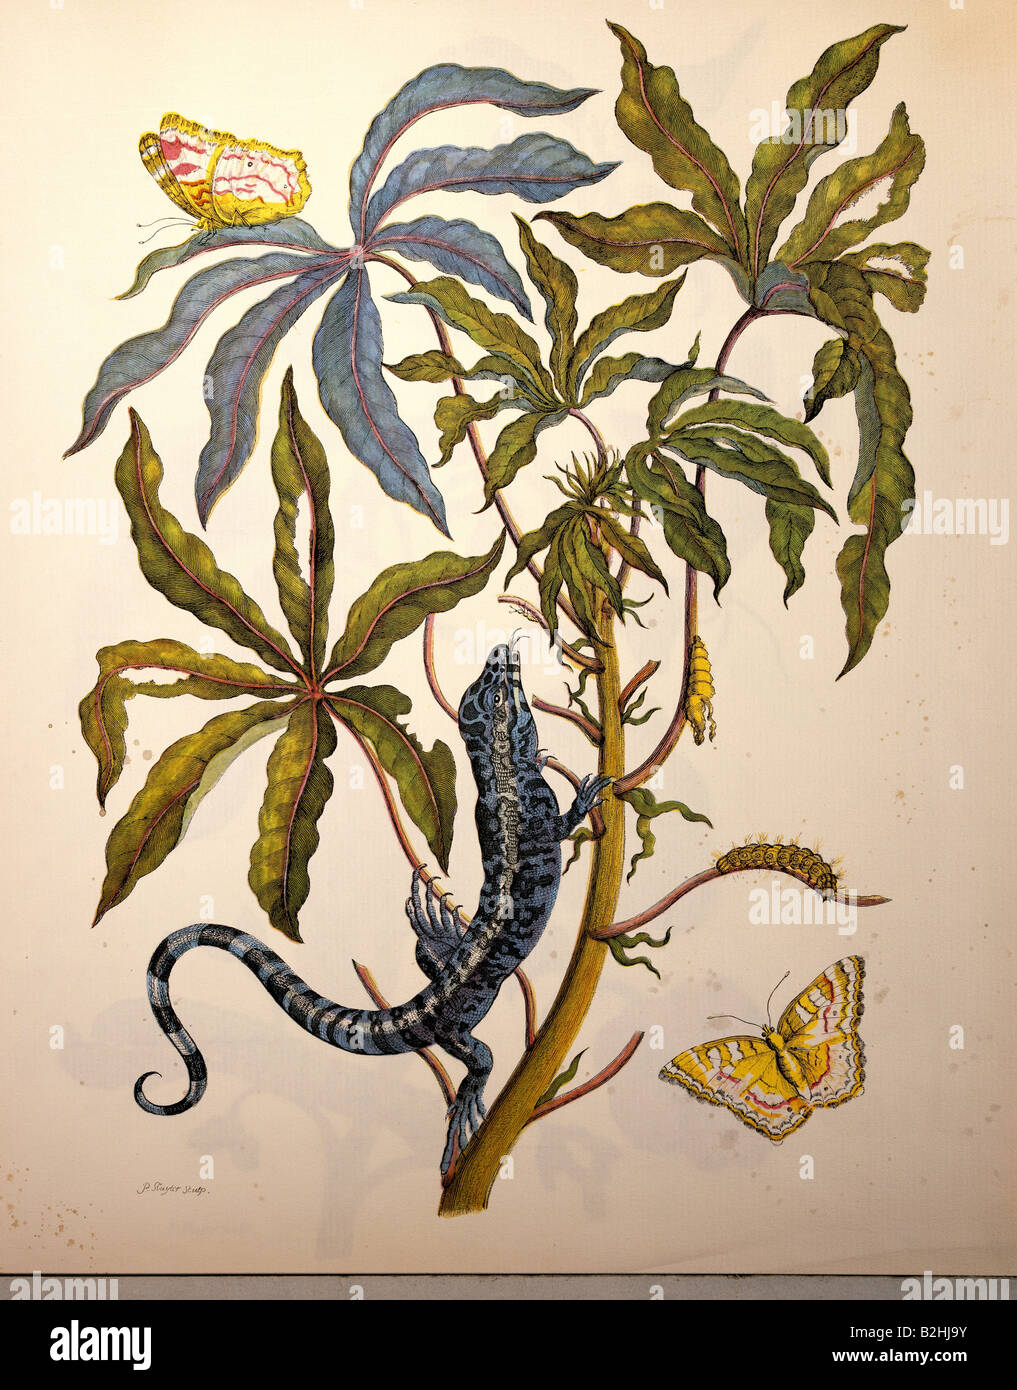 zoology, insect, butterfly, caterpillar, cocoon, plant, lizard, copper engraving, watercoloured, from 'Metamorphosis insectorum Surinamensium', by Maria Sibylla Merian (1647 - 1717), Amsterdam, Netherlands, 1705, private collection, Artist's Copyright has not to be cleared Stock Photo